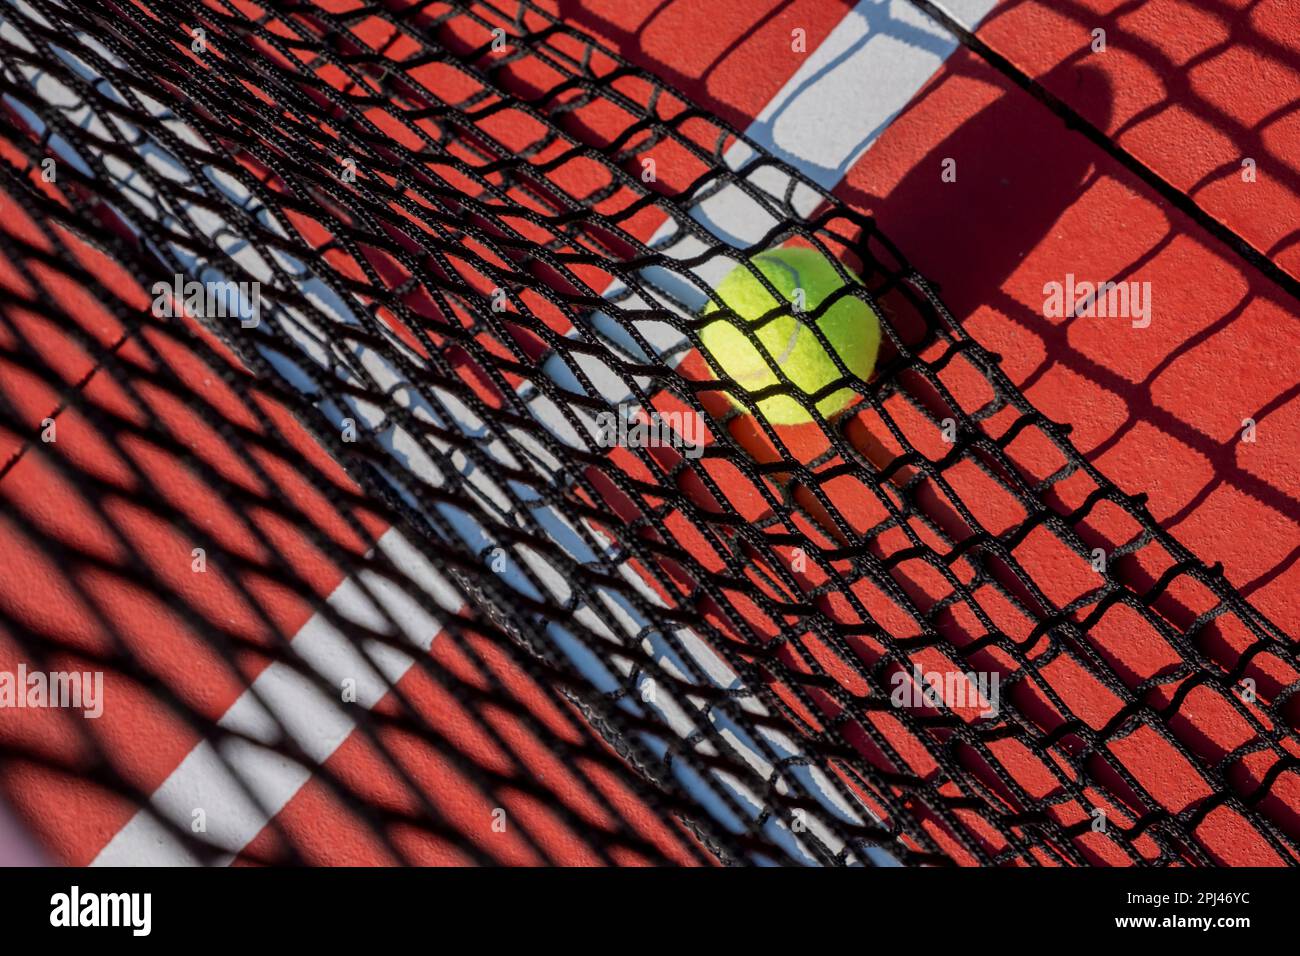 selective focus, a ball in the net of a tennis court painted red Stock Photo